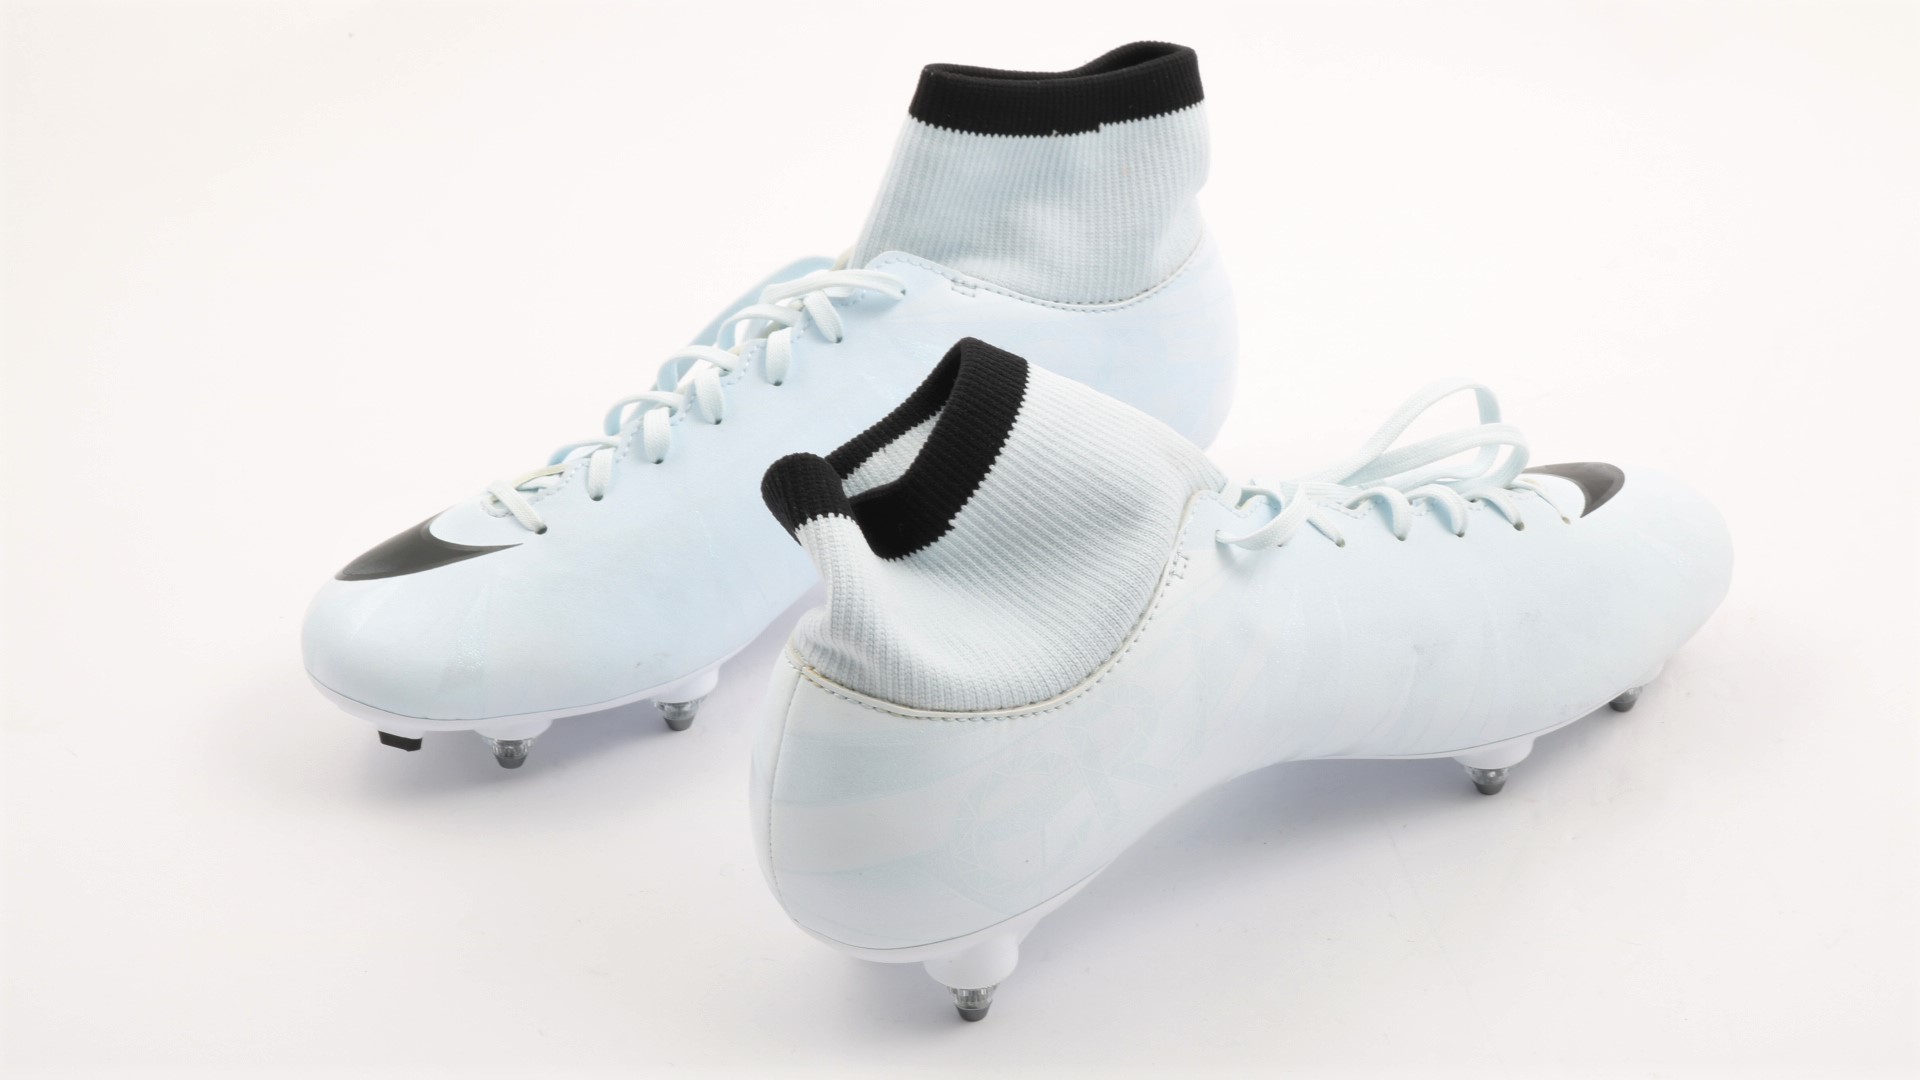 A look at all 31 Signature Nike Mercurial CR7 Boots - SoccerBible